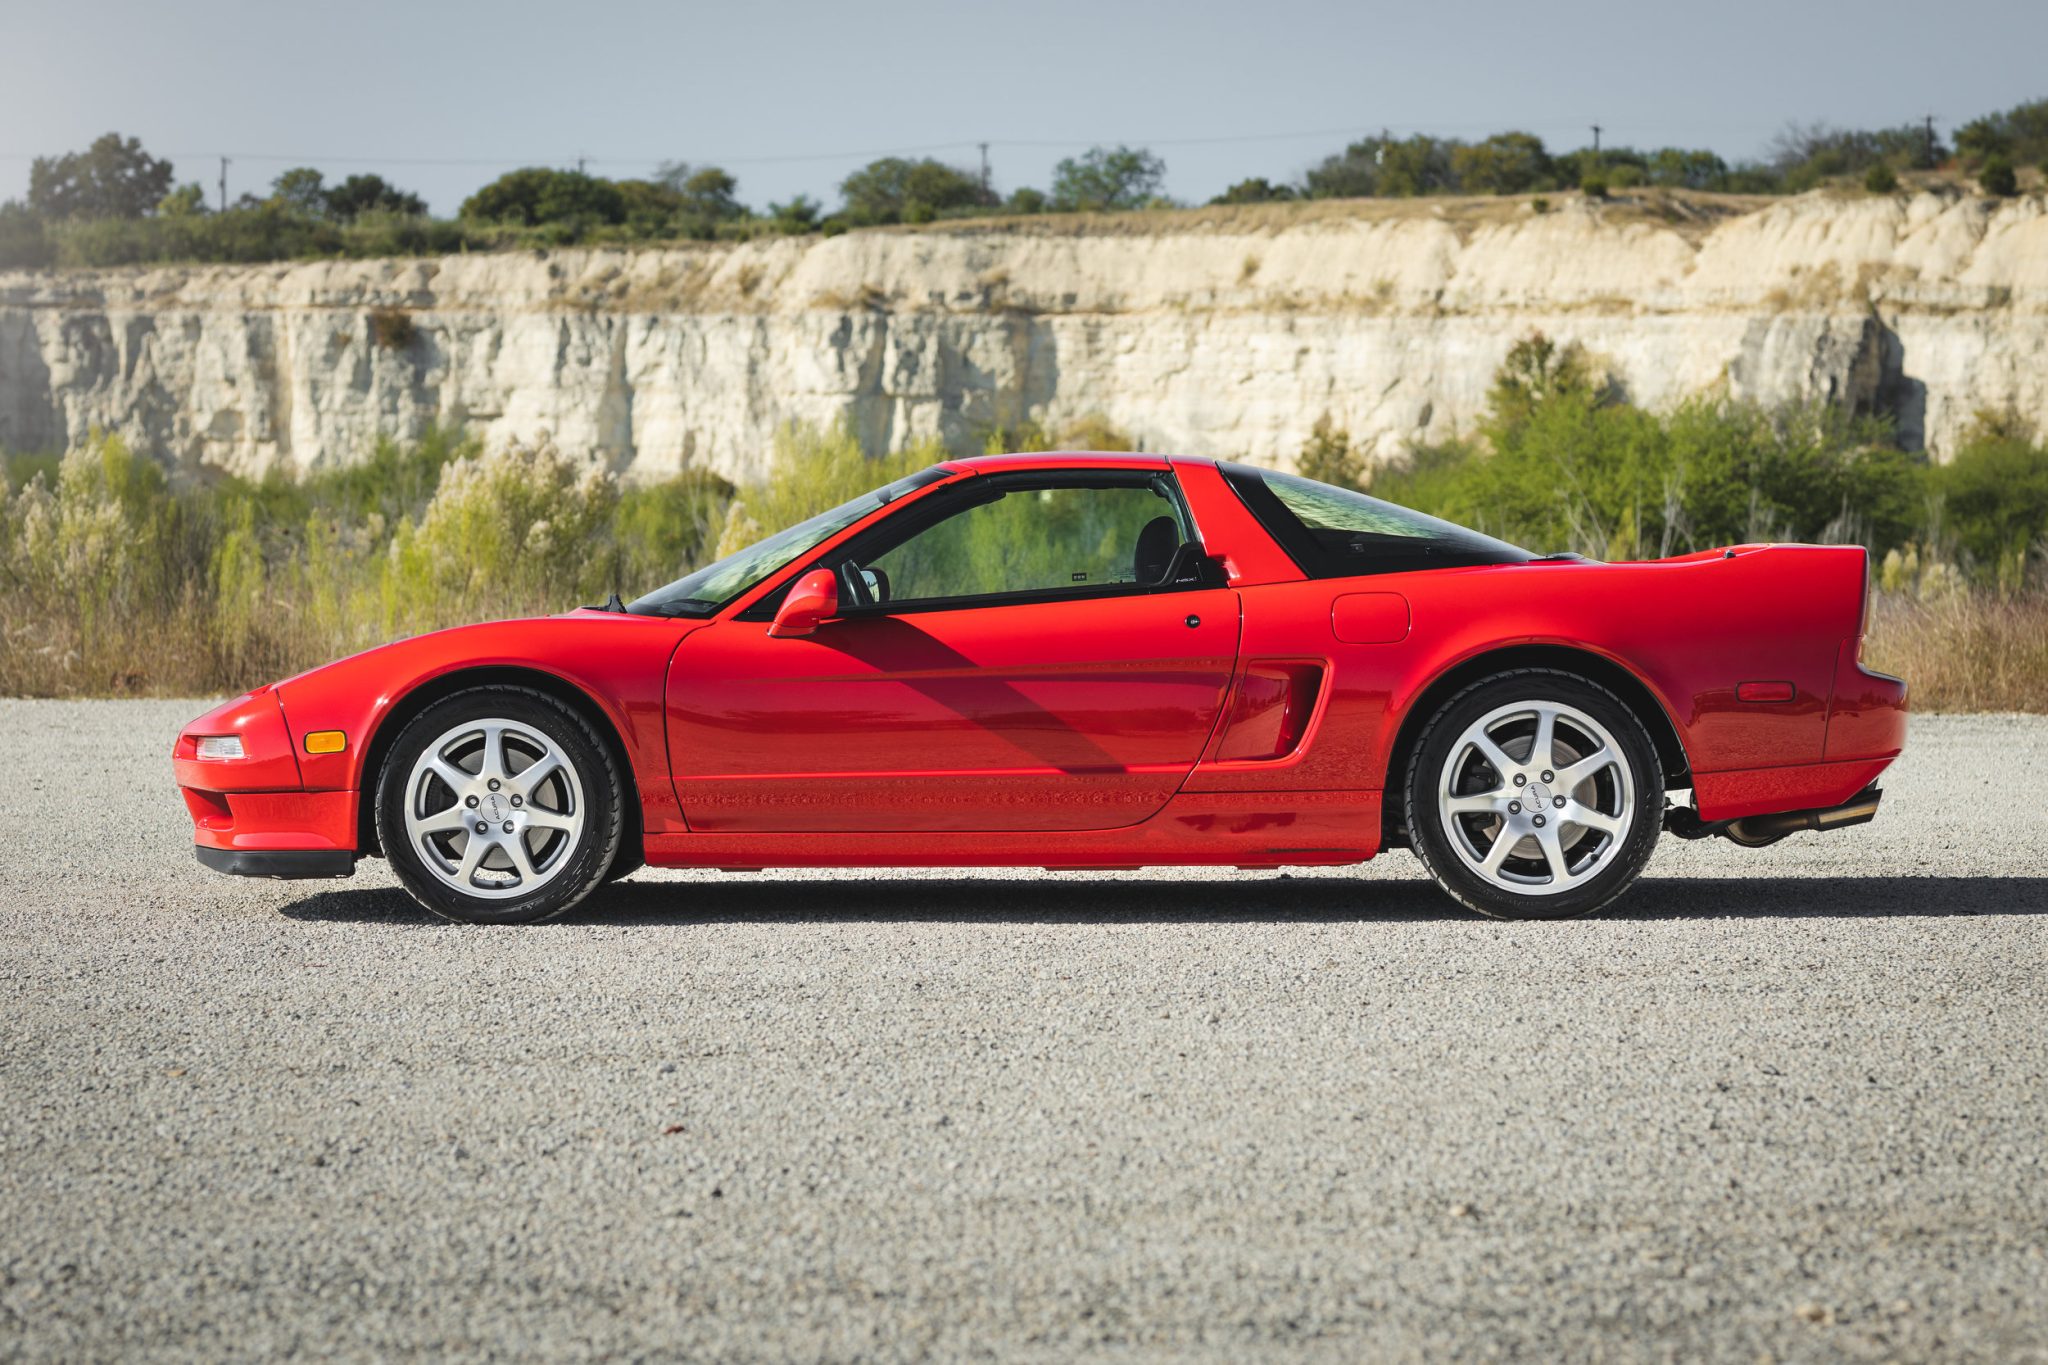 Low Mileage 1998 Acura NSX-T 6-Speed On Offer At Bring A Trailer |  Supercars.net